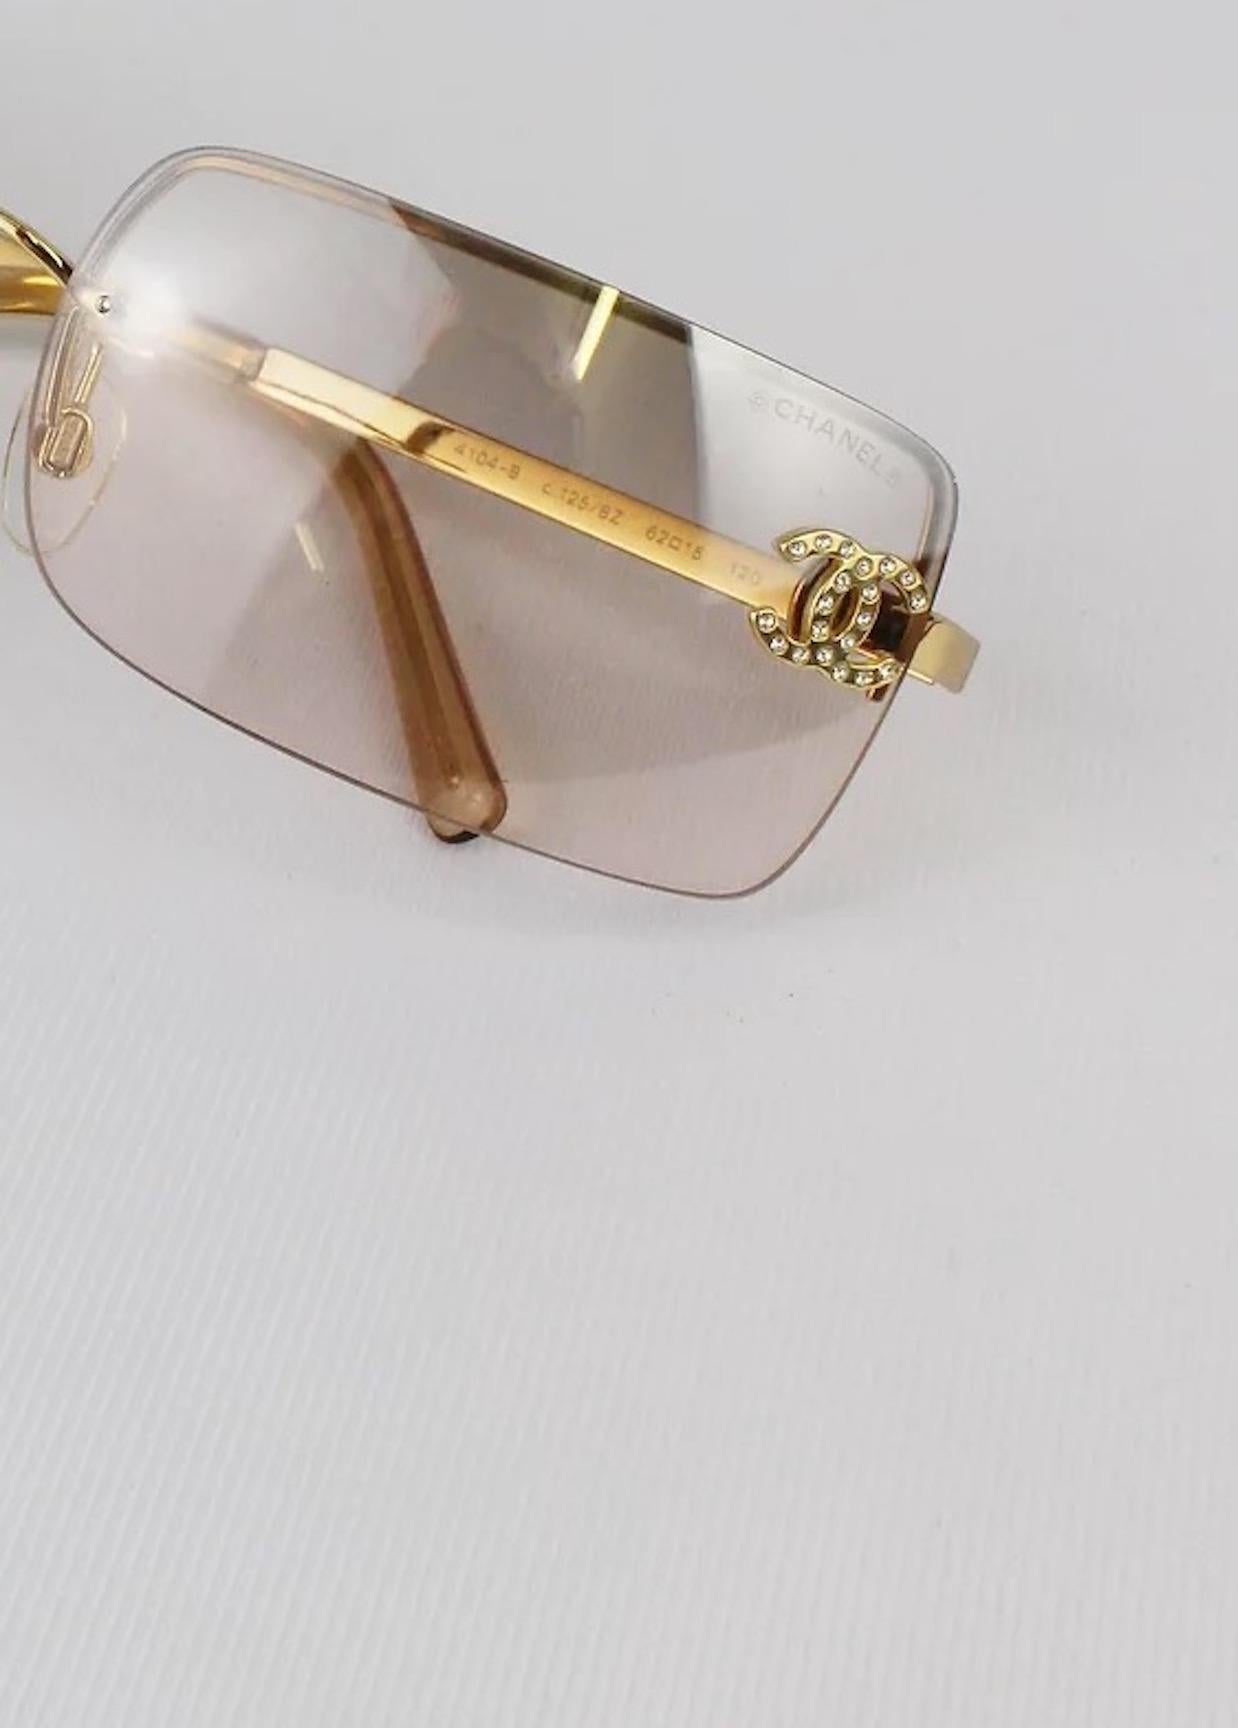 Chanel Rimless - 8 For Sale on 1stDibs  chanel vintage rimless sunglasses,  vintage rimless chanel sunglasses, vintage chanel rimless sunglasses